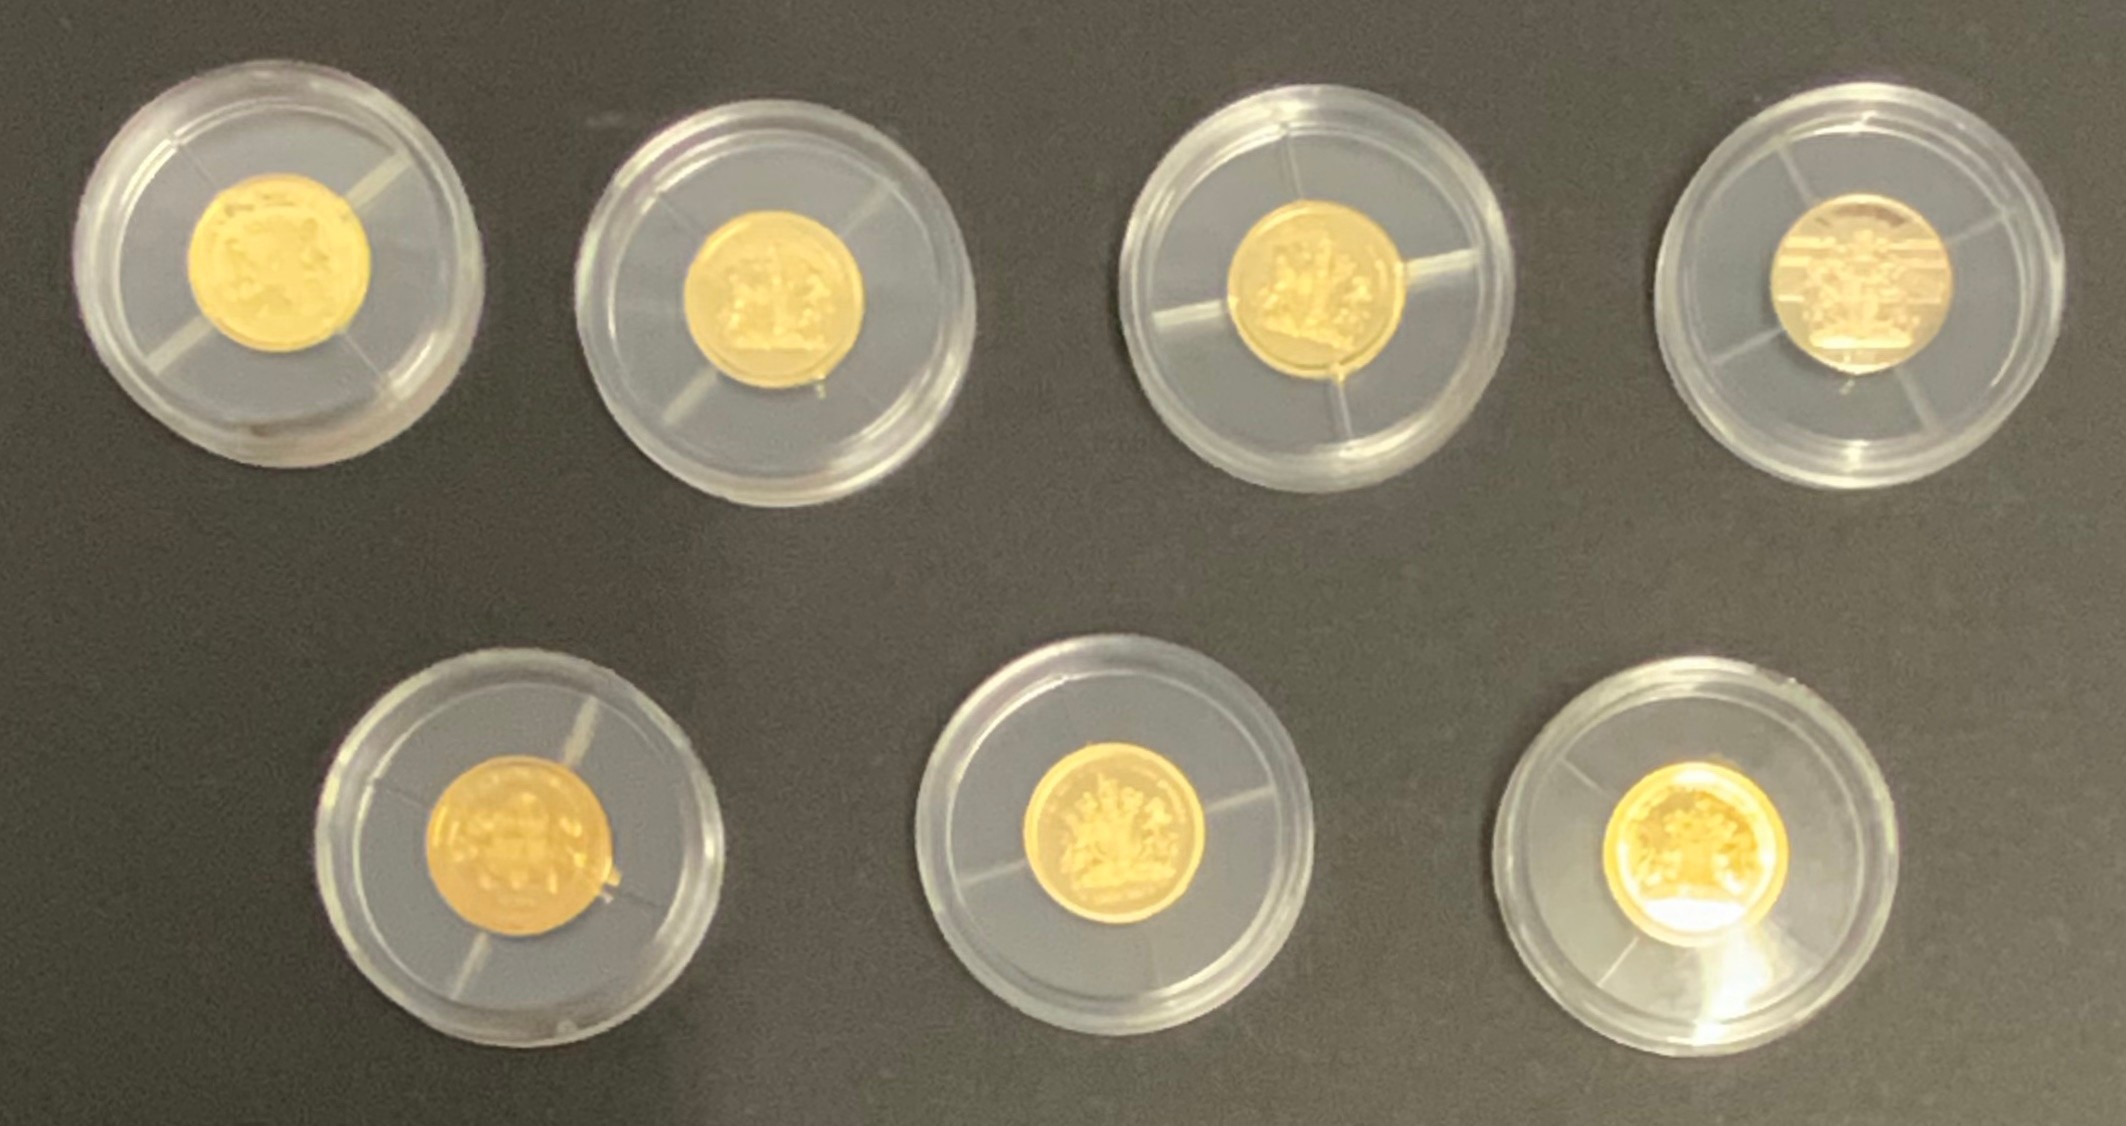 SEVEN MINIATURE GOLD COINS - Image 2 of 2